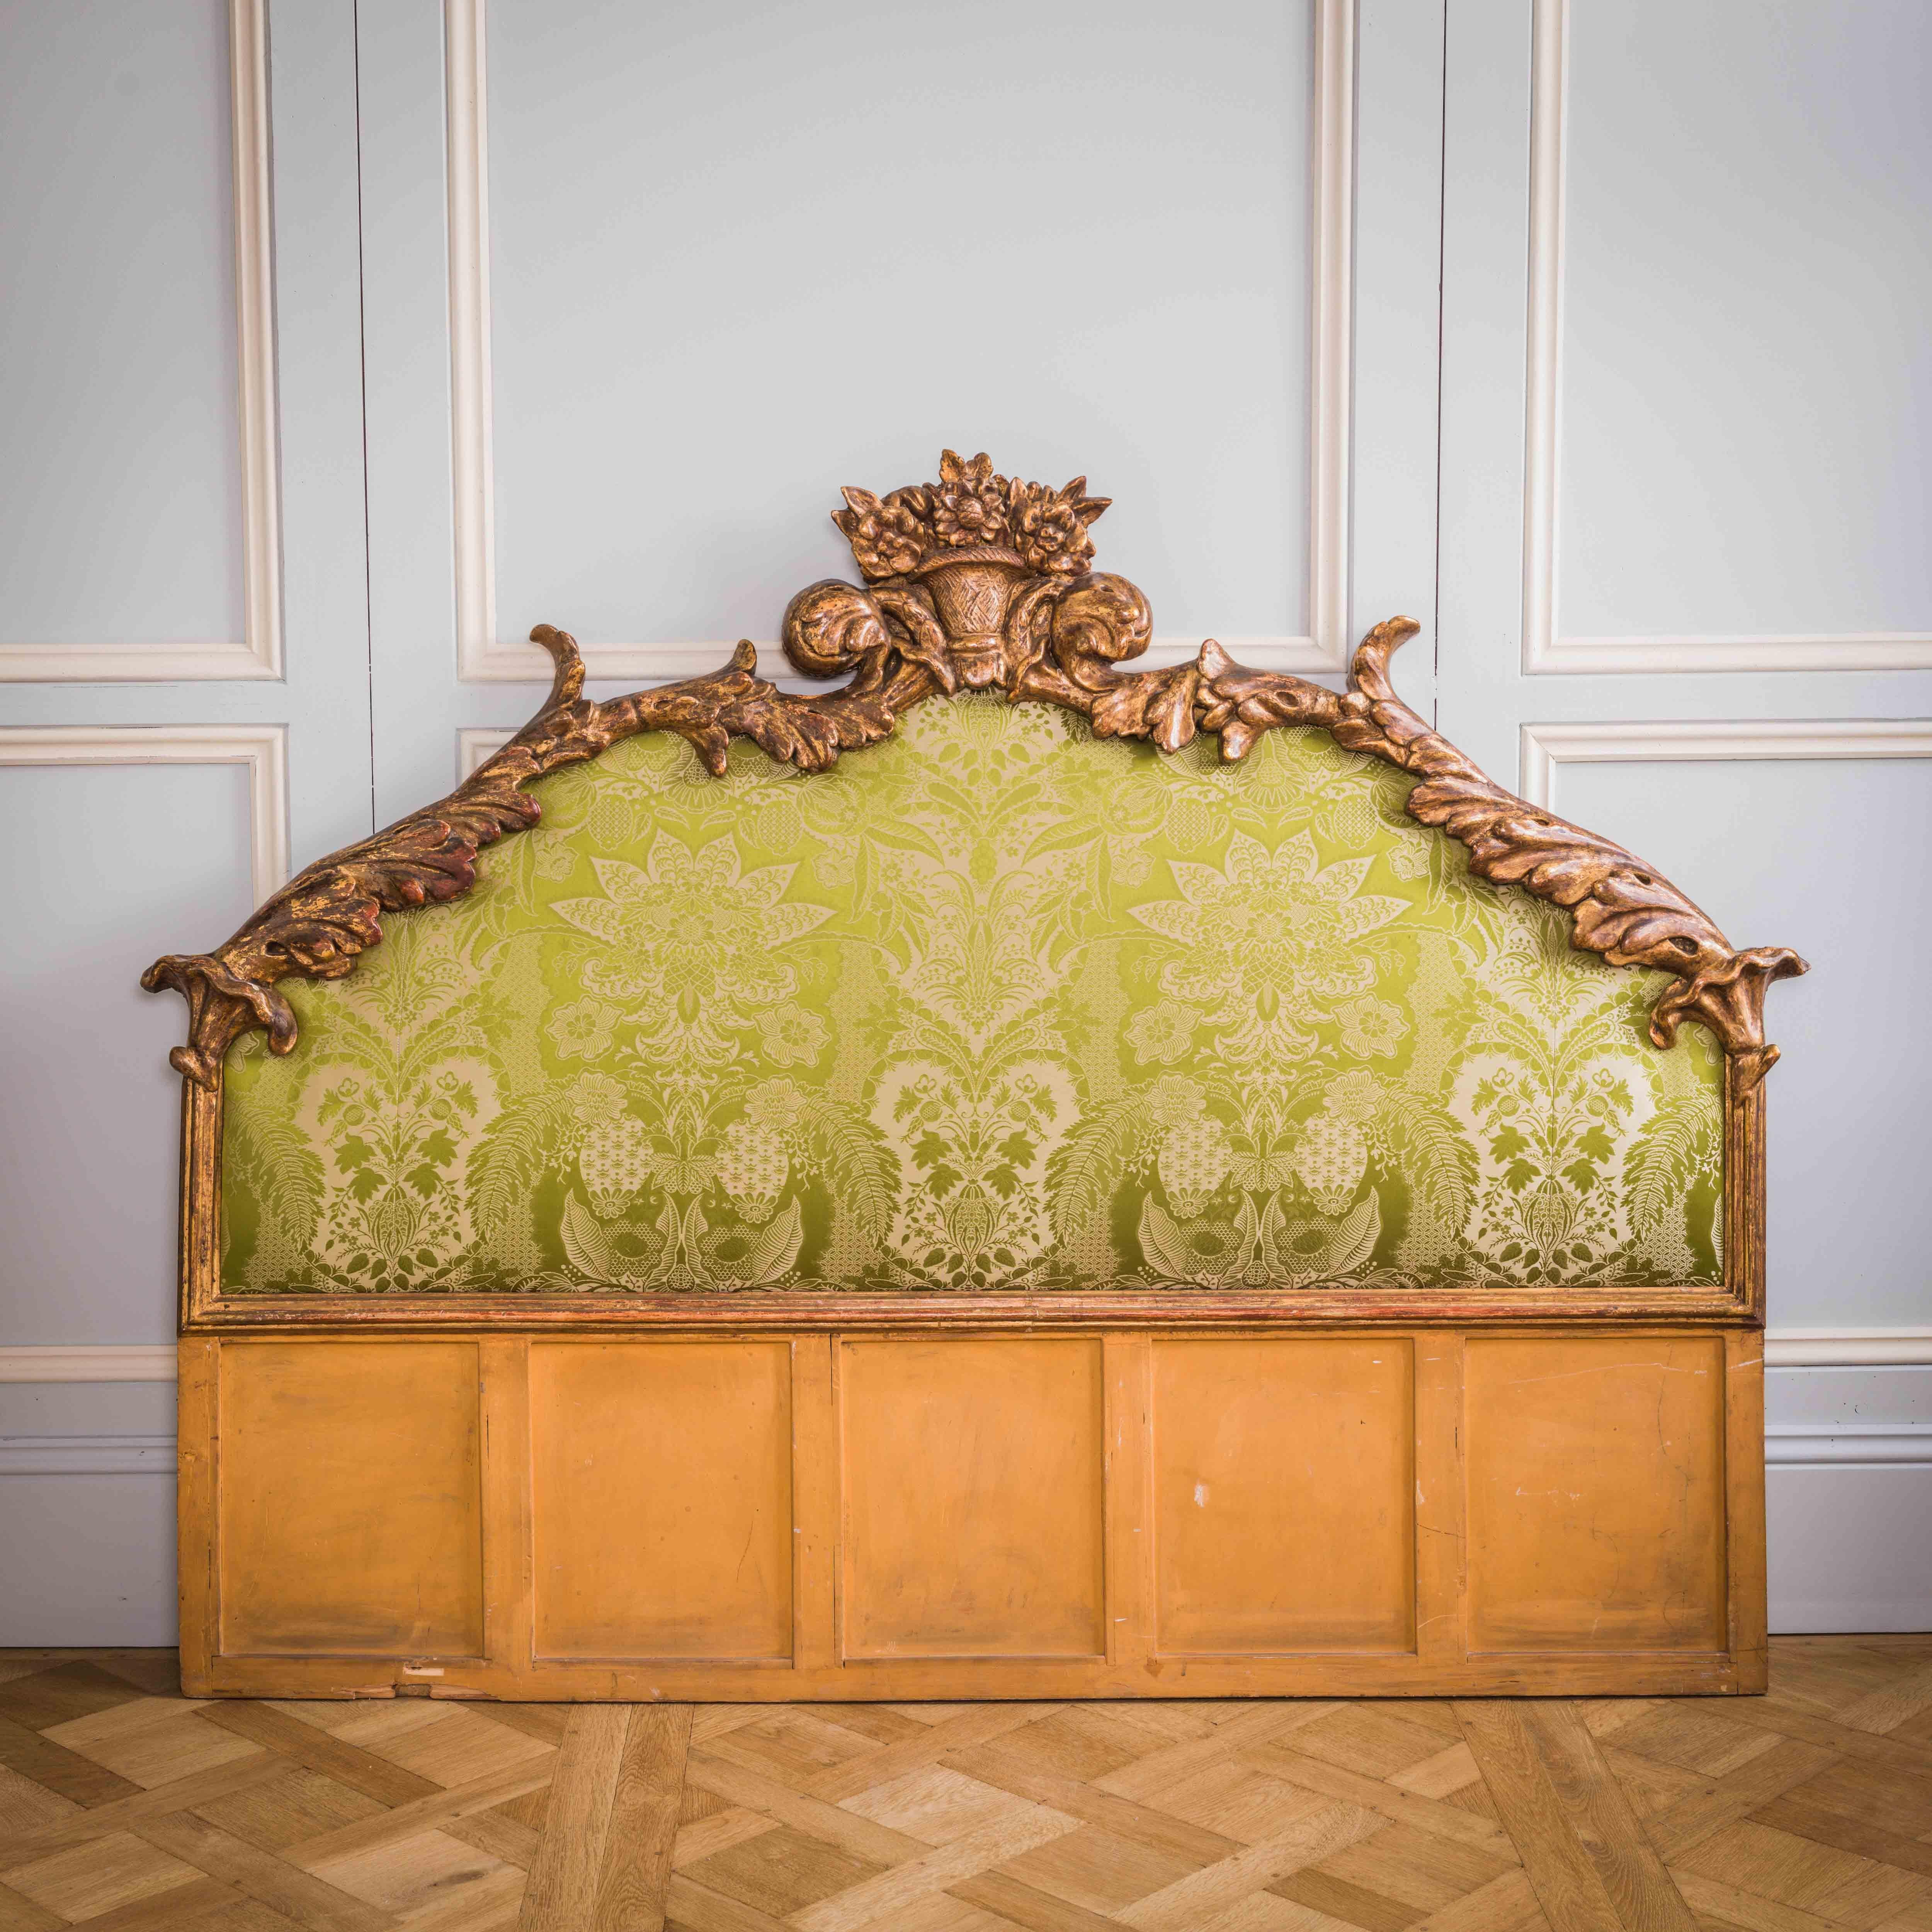 An exceptional Italian headboard in the Baroque style, Circa 1880, made of a a generously carved surround featuring acanthus leaves with a floral crest at its apex. The gilding on this piece is original with a naturally aged, deep toned patina,